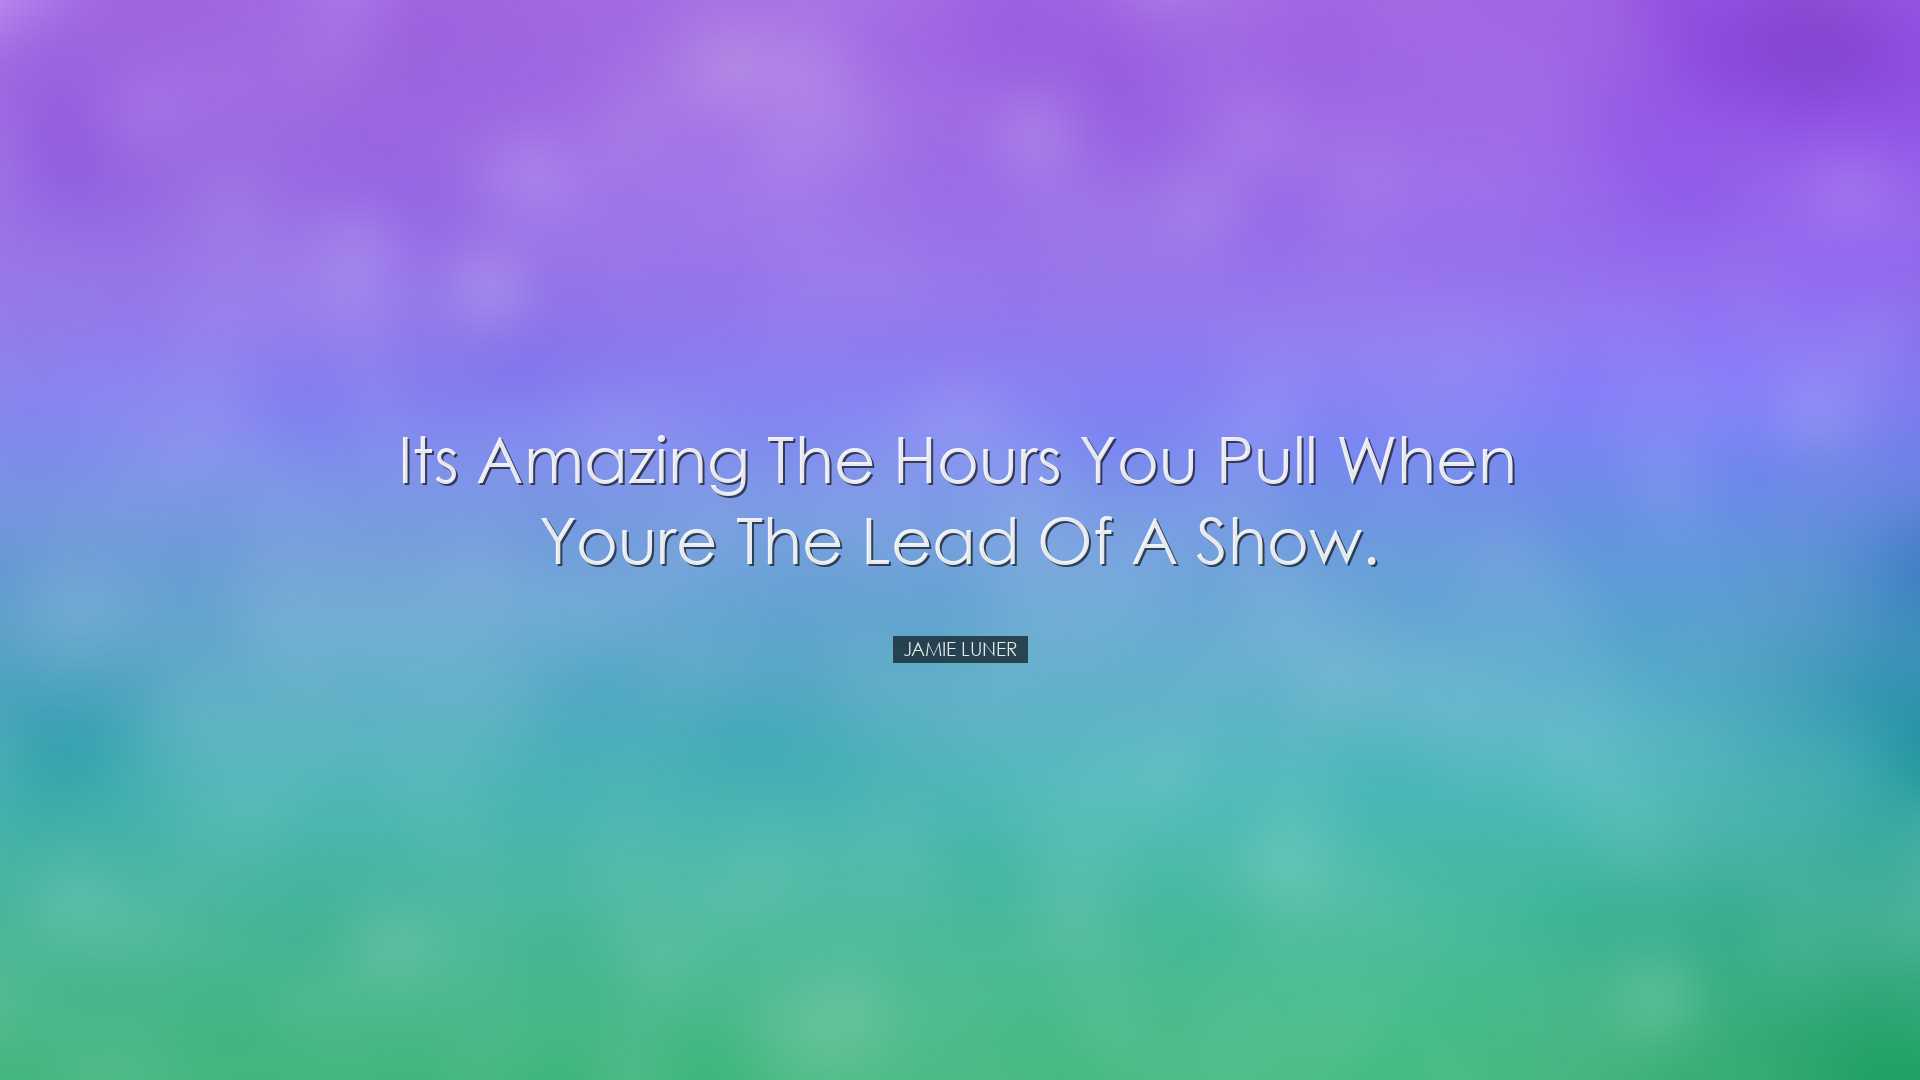 Its amazing the hours you pull when youre the lead of a show. - Ja